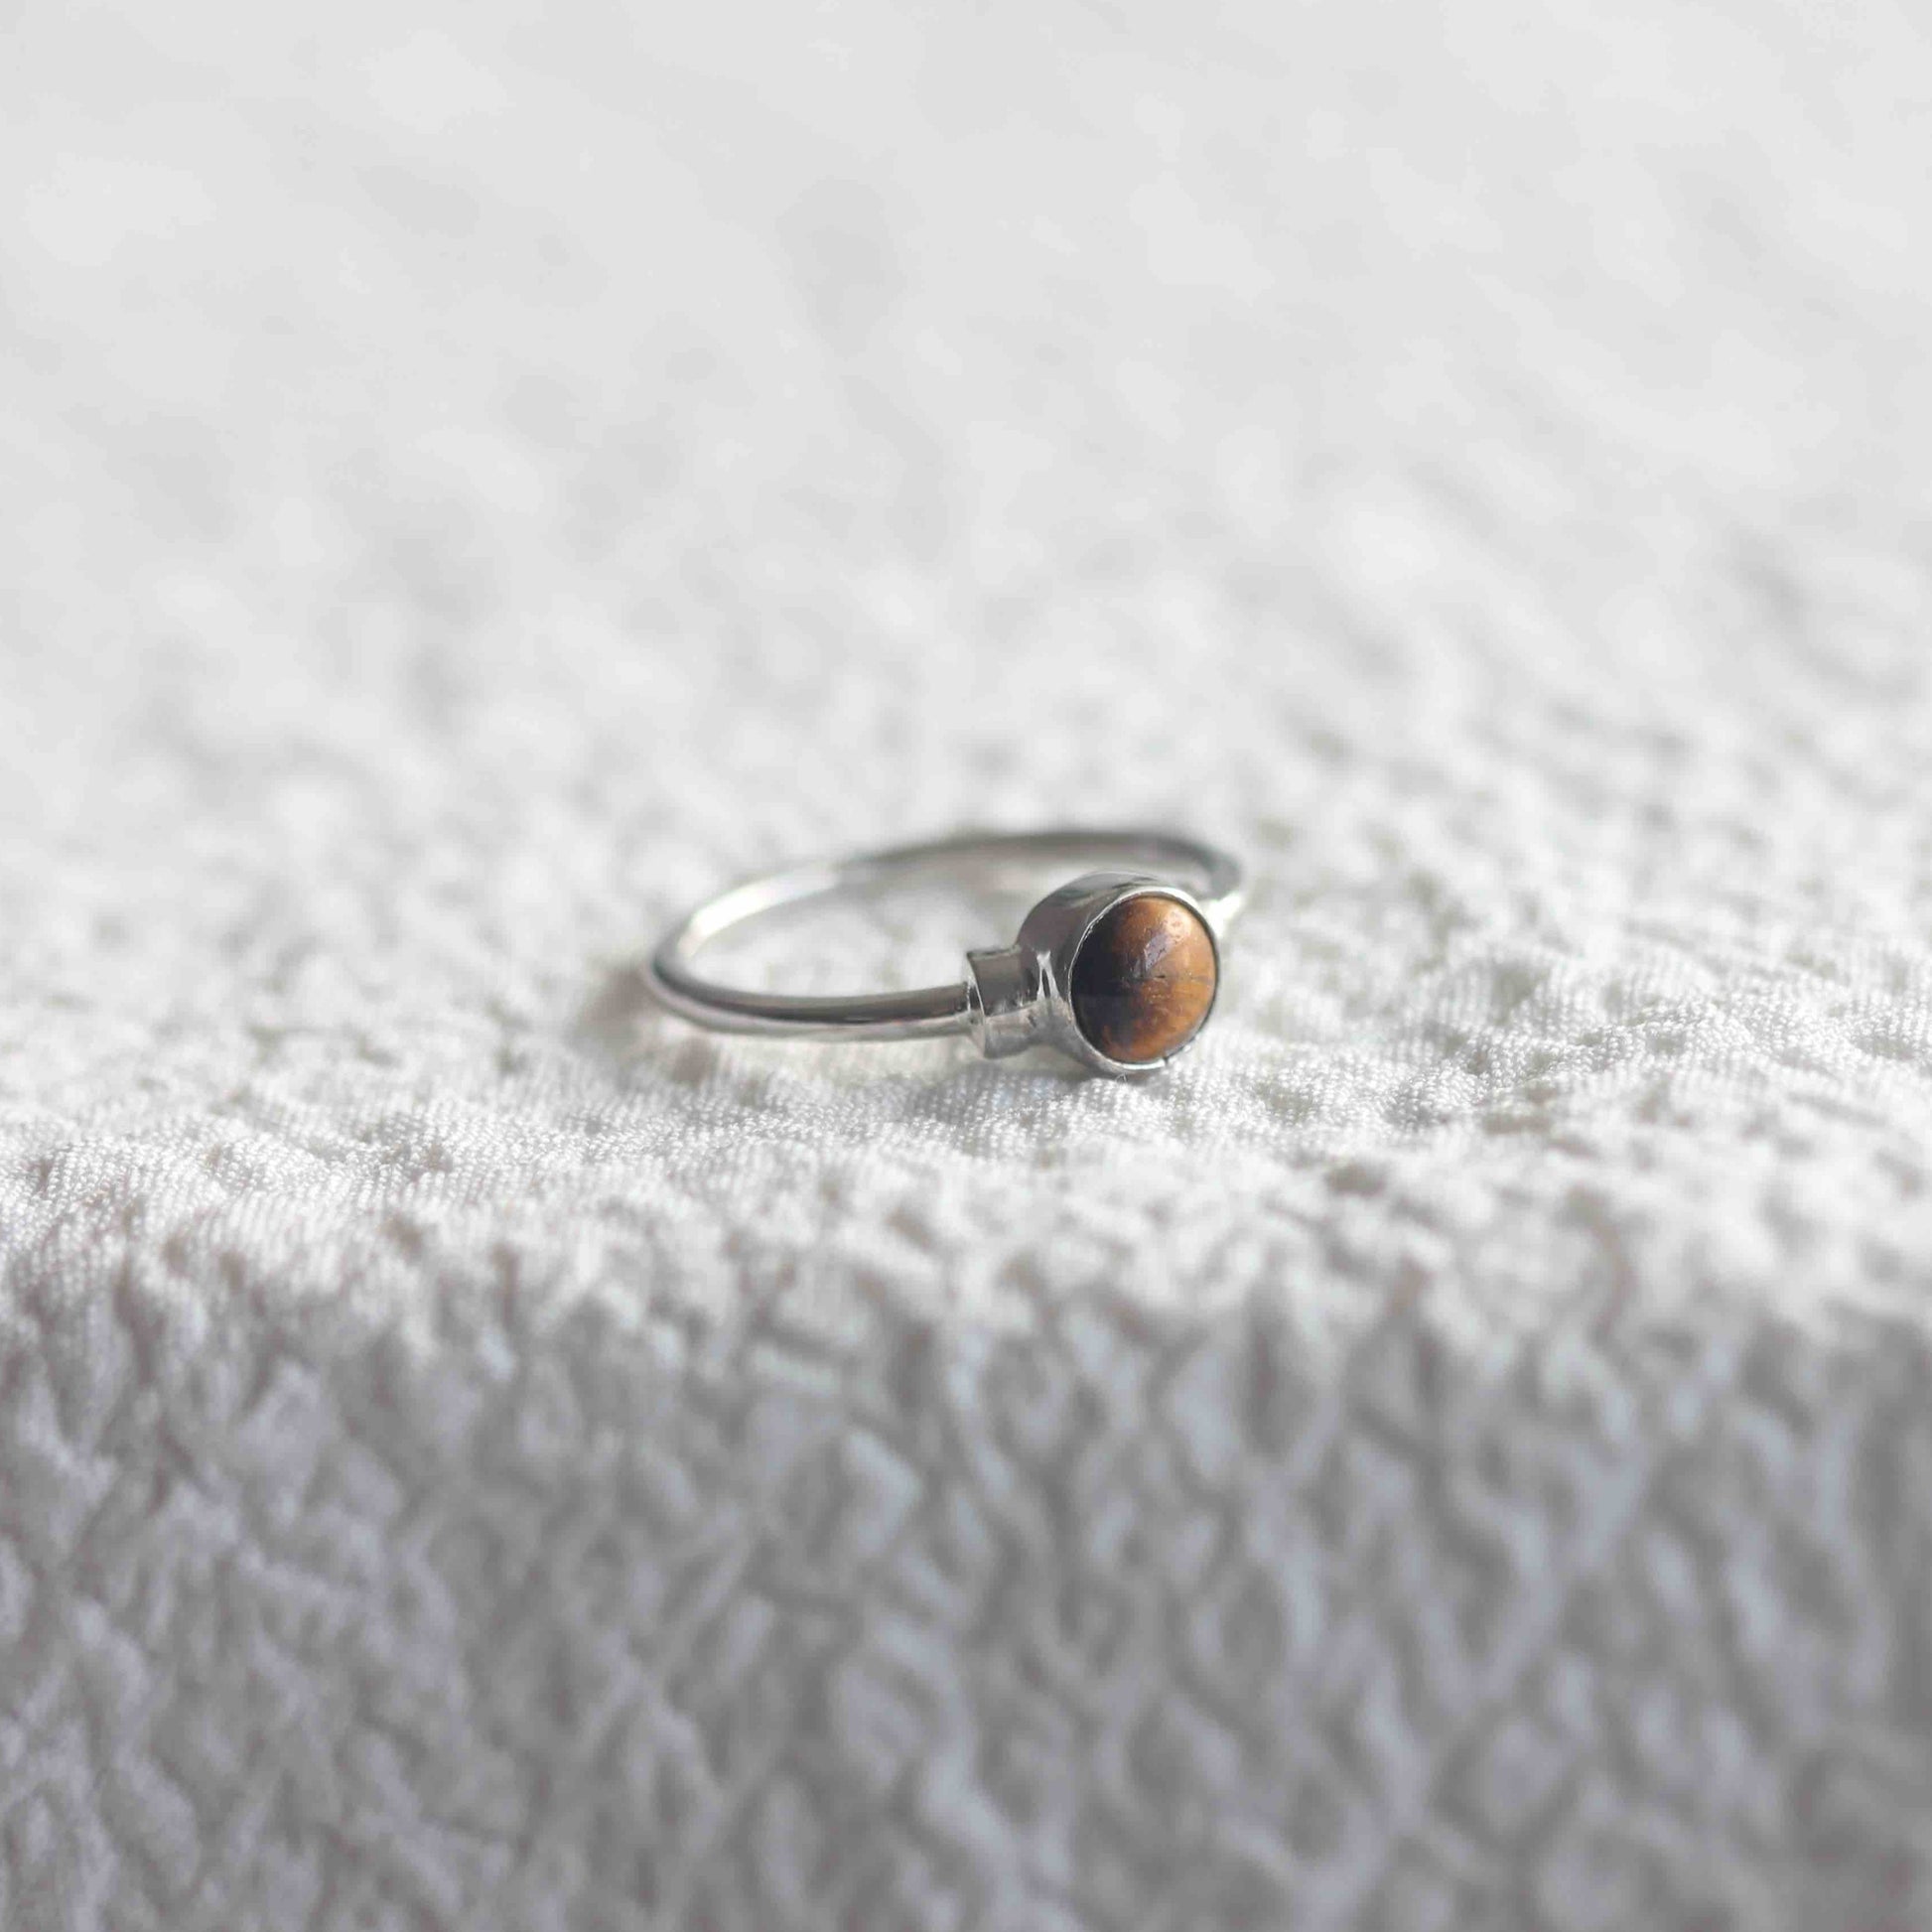 Tiger's Eye Ring, Tiger's Eye Jewelry, Gemstone Rings, Sterling Silver Jewelry, Zirconia Rings, Silver Rings for Women